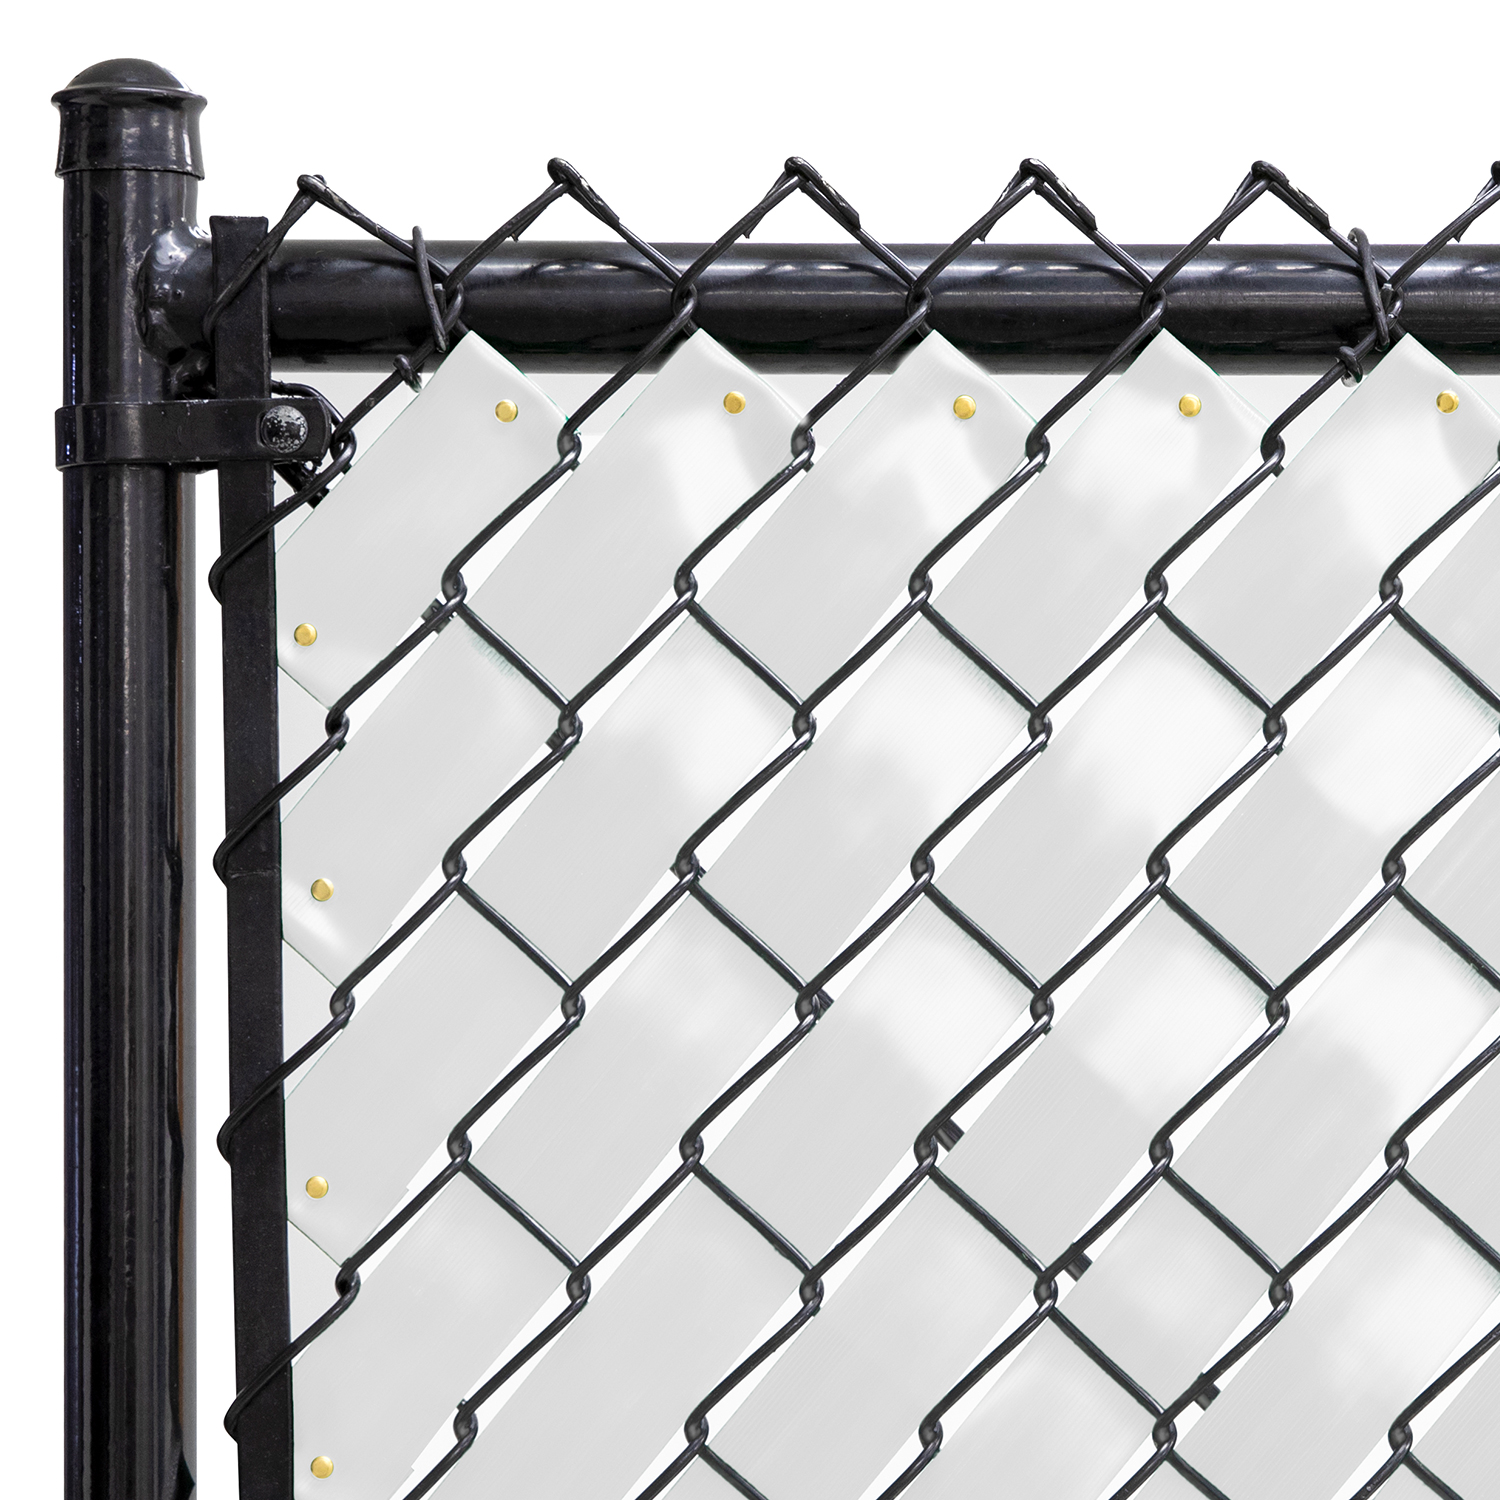 Fenpro Chain Link Fence Privacy Tape obsidian Black A18 for sale online 